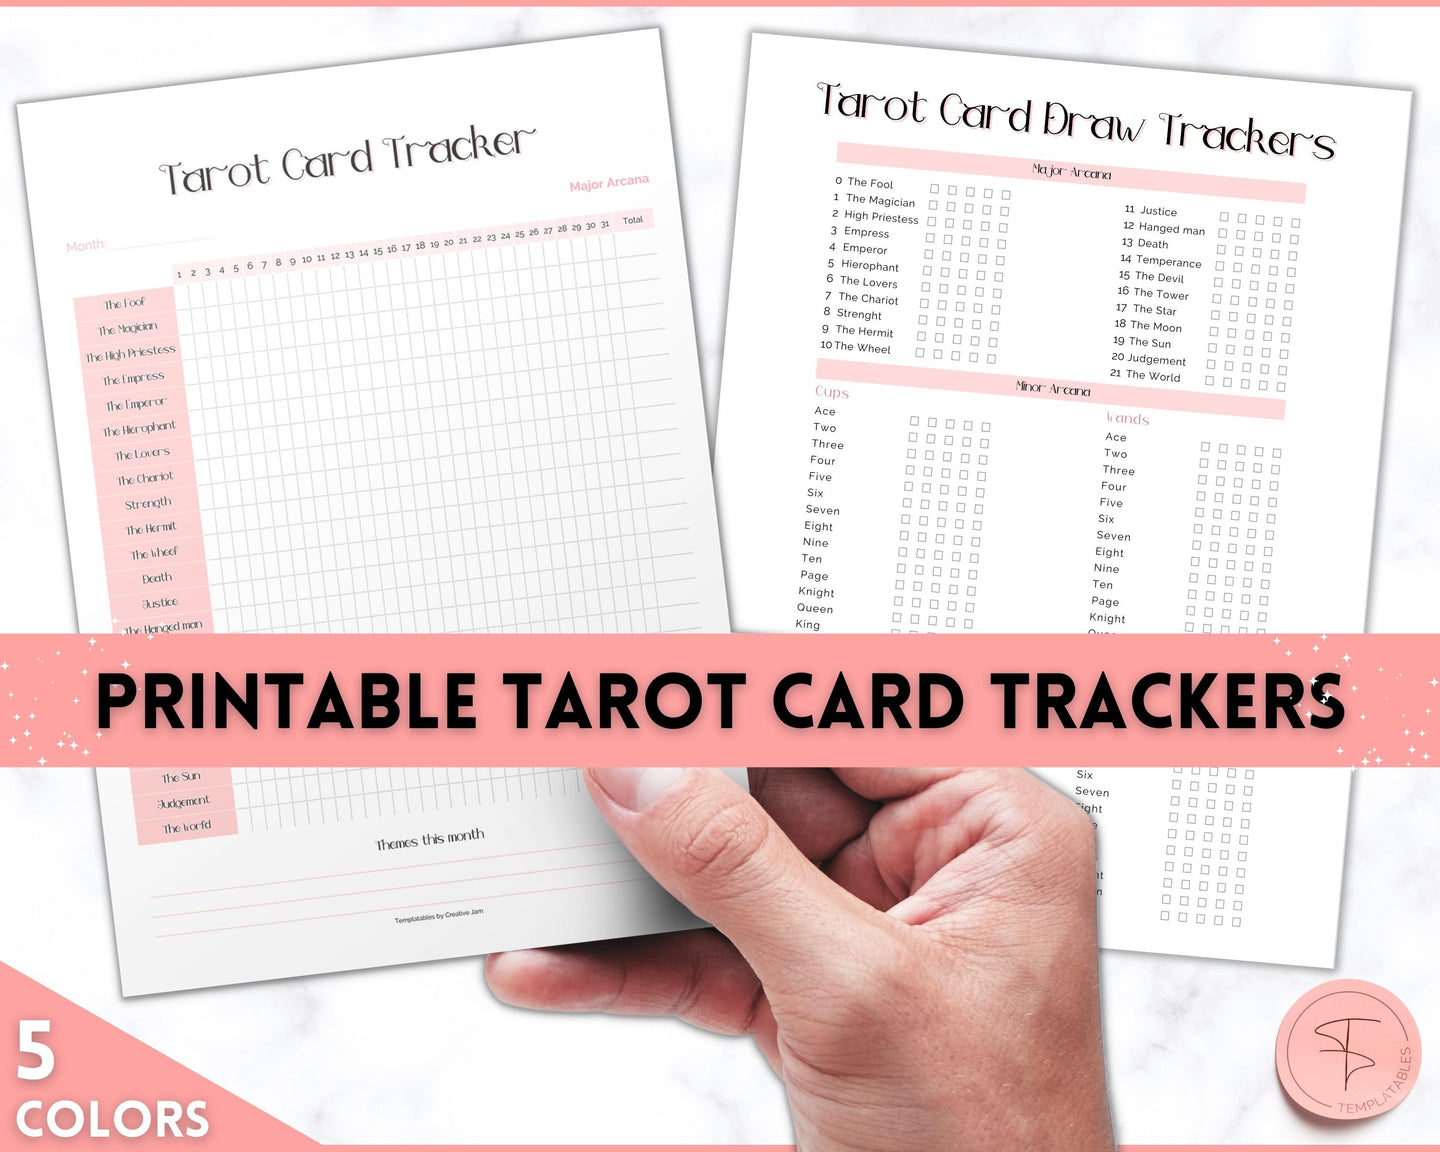 Tarot Card Trackers & Monthly Readings | Learn Tarot Card Readings, Tarot Spreads | Beginner Tarot Planner Workbook, Grimoire & Cheat Sheets | Pink